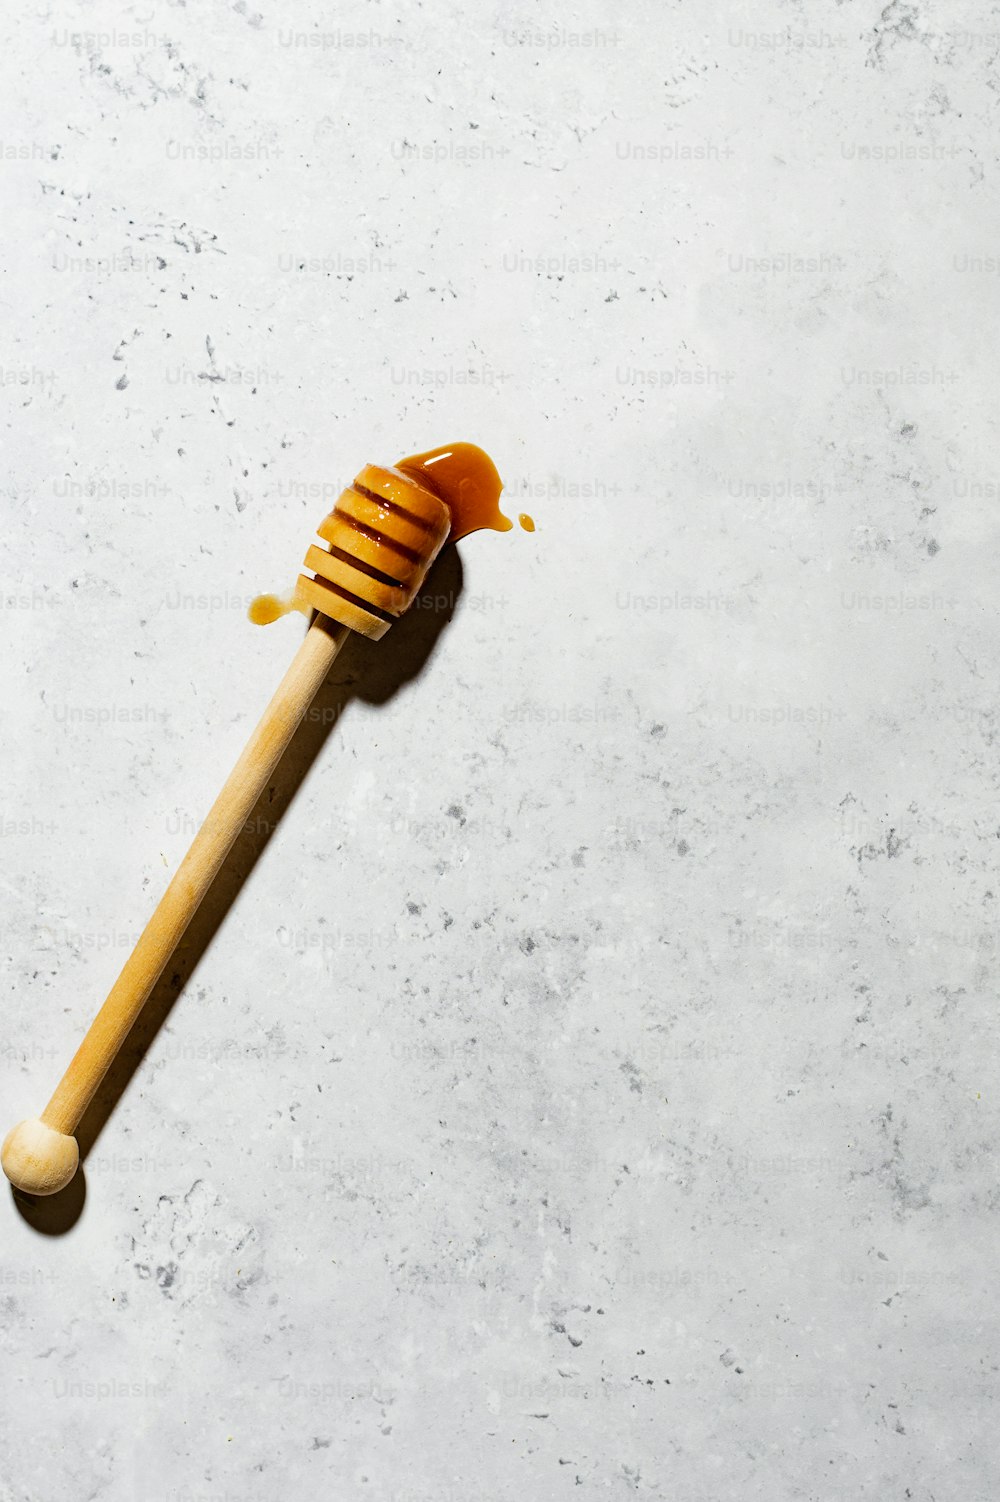 a wooden toothbrush with honey on it